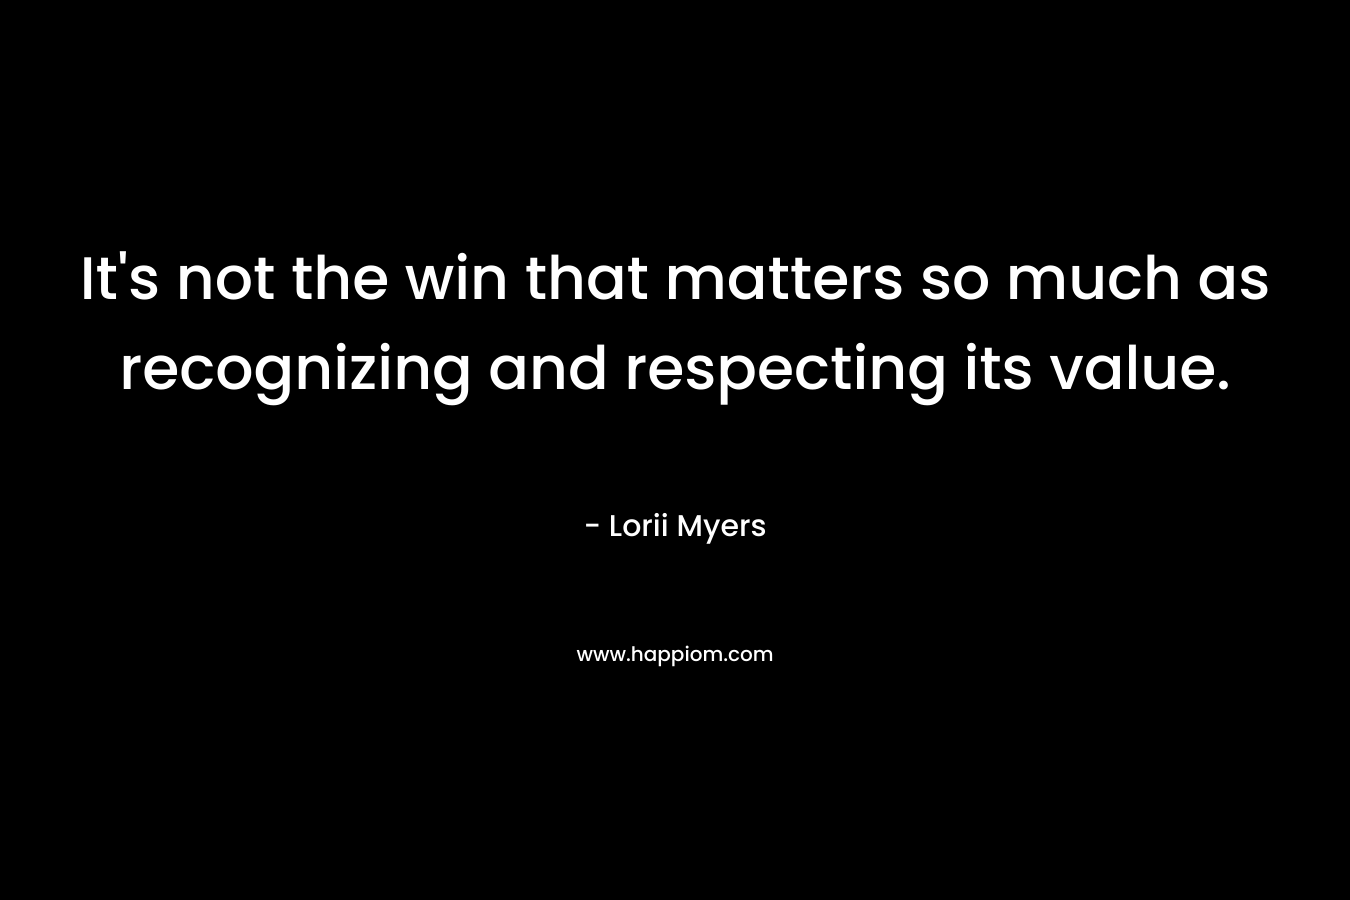 It's not the win that matters so much as recognizing and respecting its value.